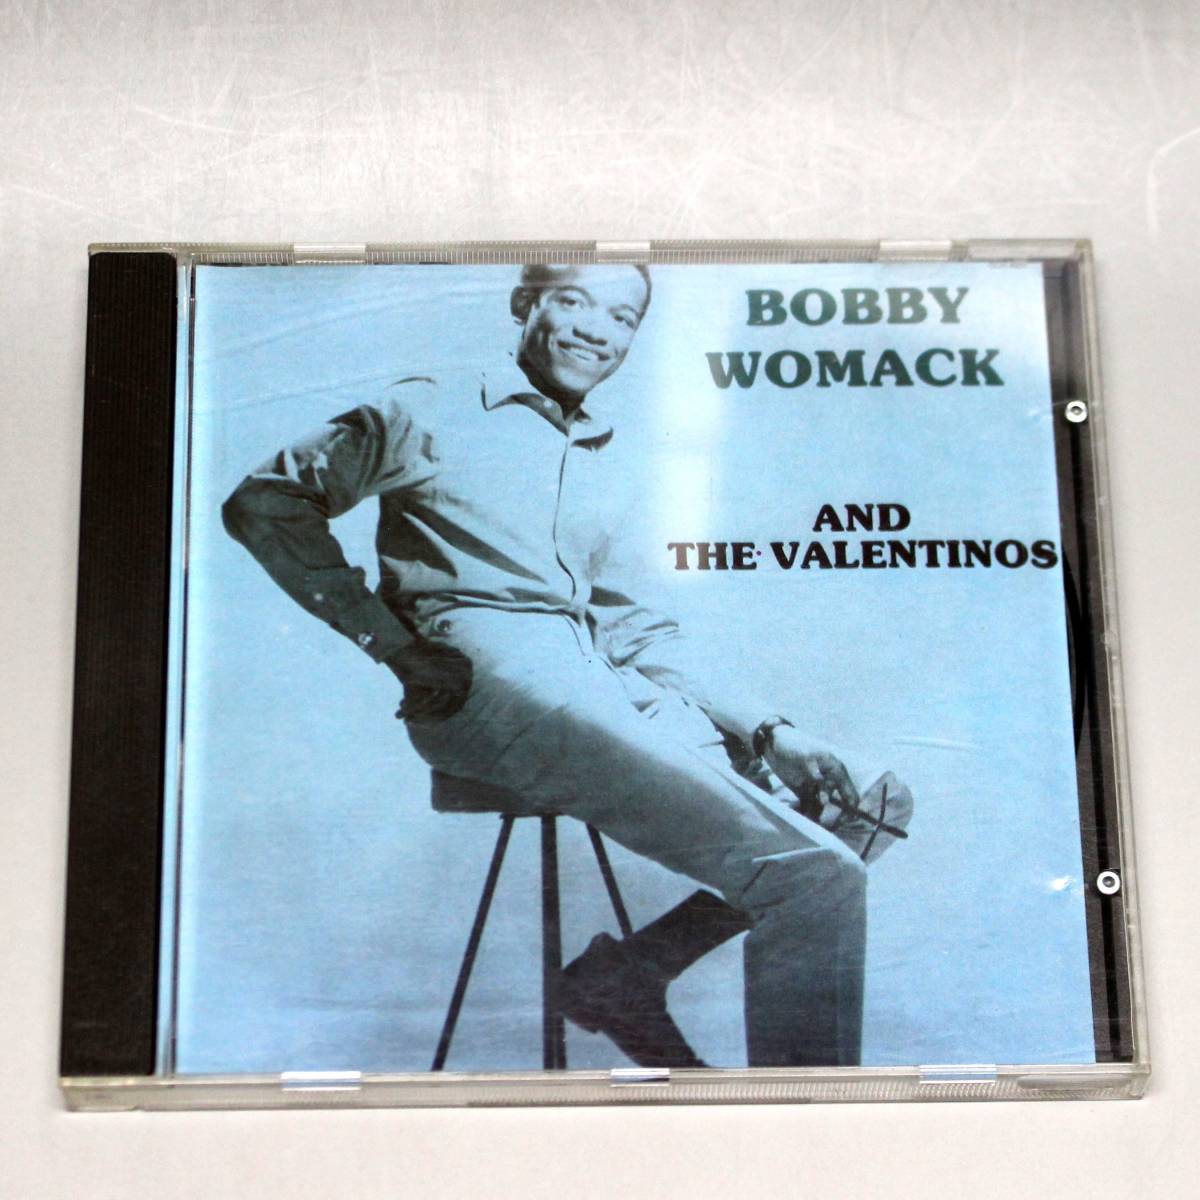 【THE VALENTINOS】 Bobby Womack ＆The Valentinos CD Chess1021 ヴァレンチノズ ボビー・ウーマック sam cooke サム・クック_画像1